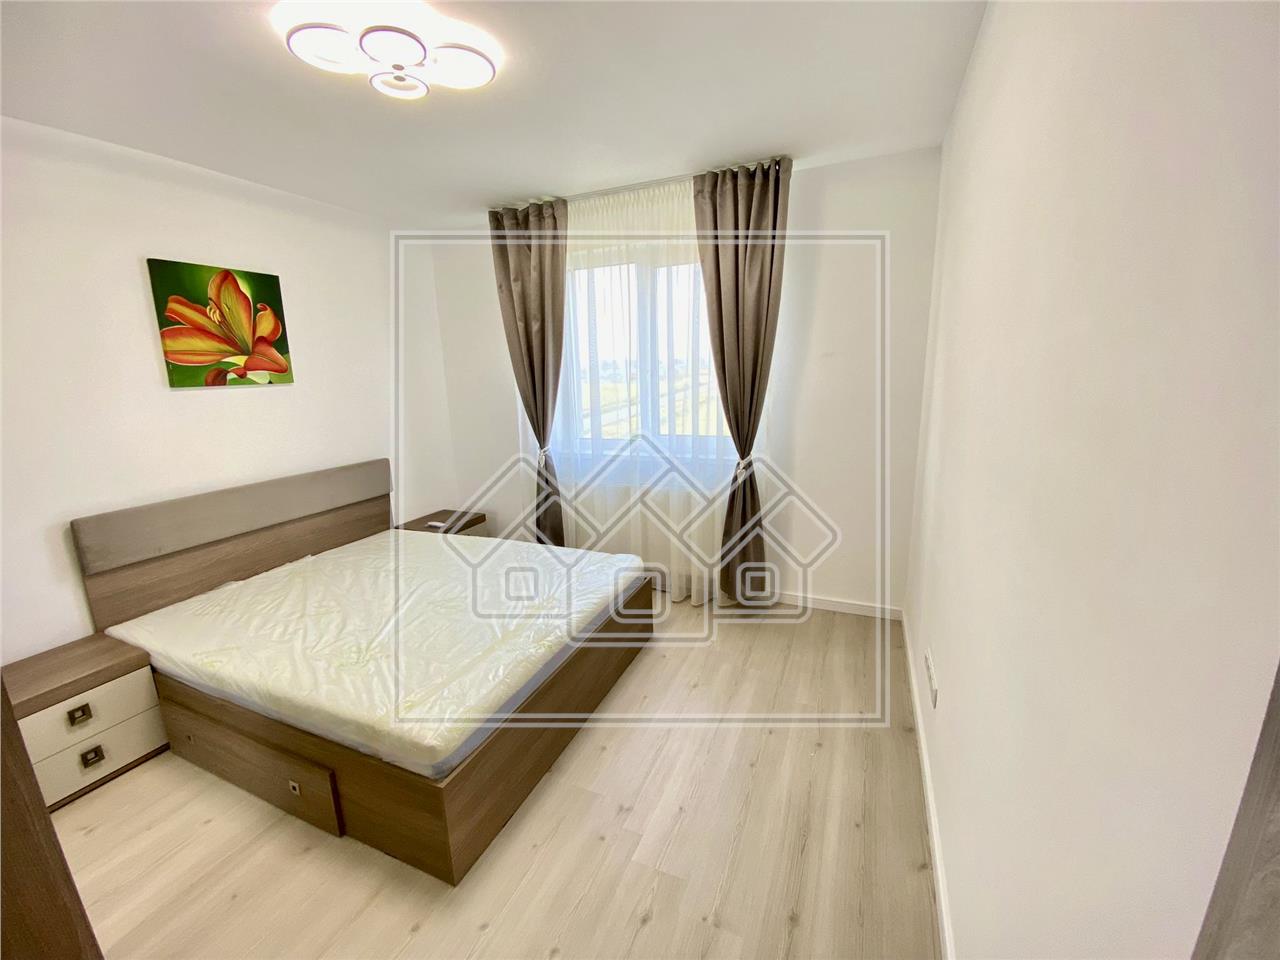 Apartment for sale in Sibiu - 3 rooms, detached - FINISHED KEY - Calea